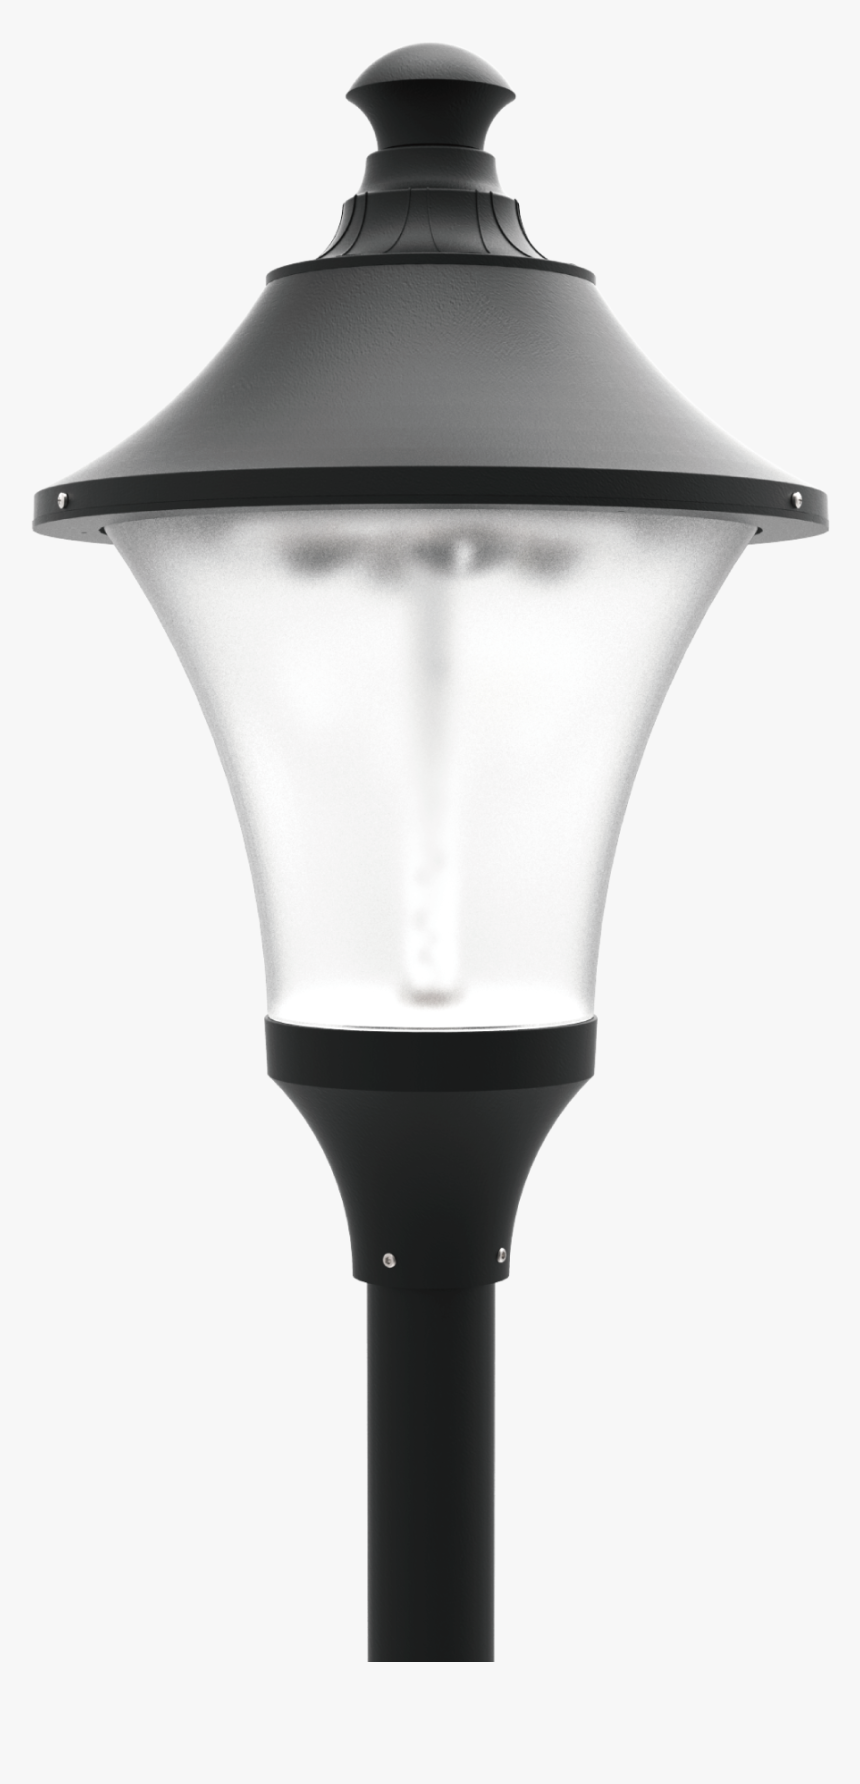 Led Pt 643 Series Led Post Top Light Fixtures Outdoor, HD Png Download, Free Download